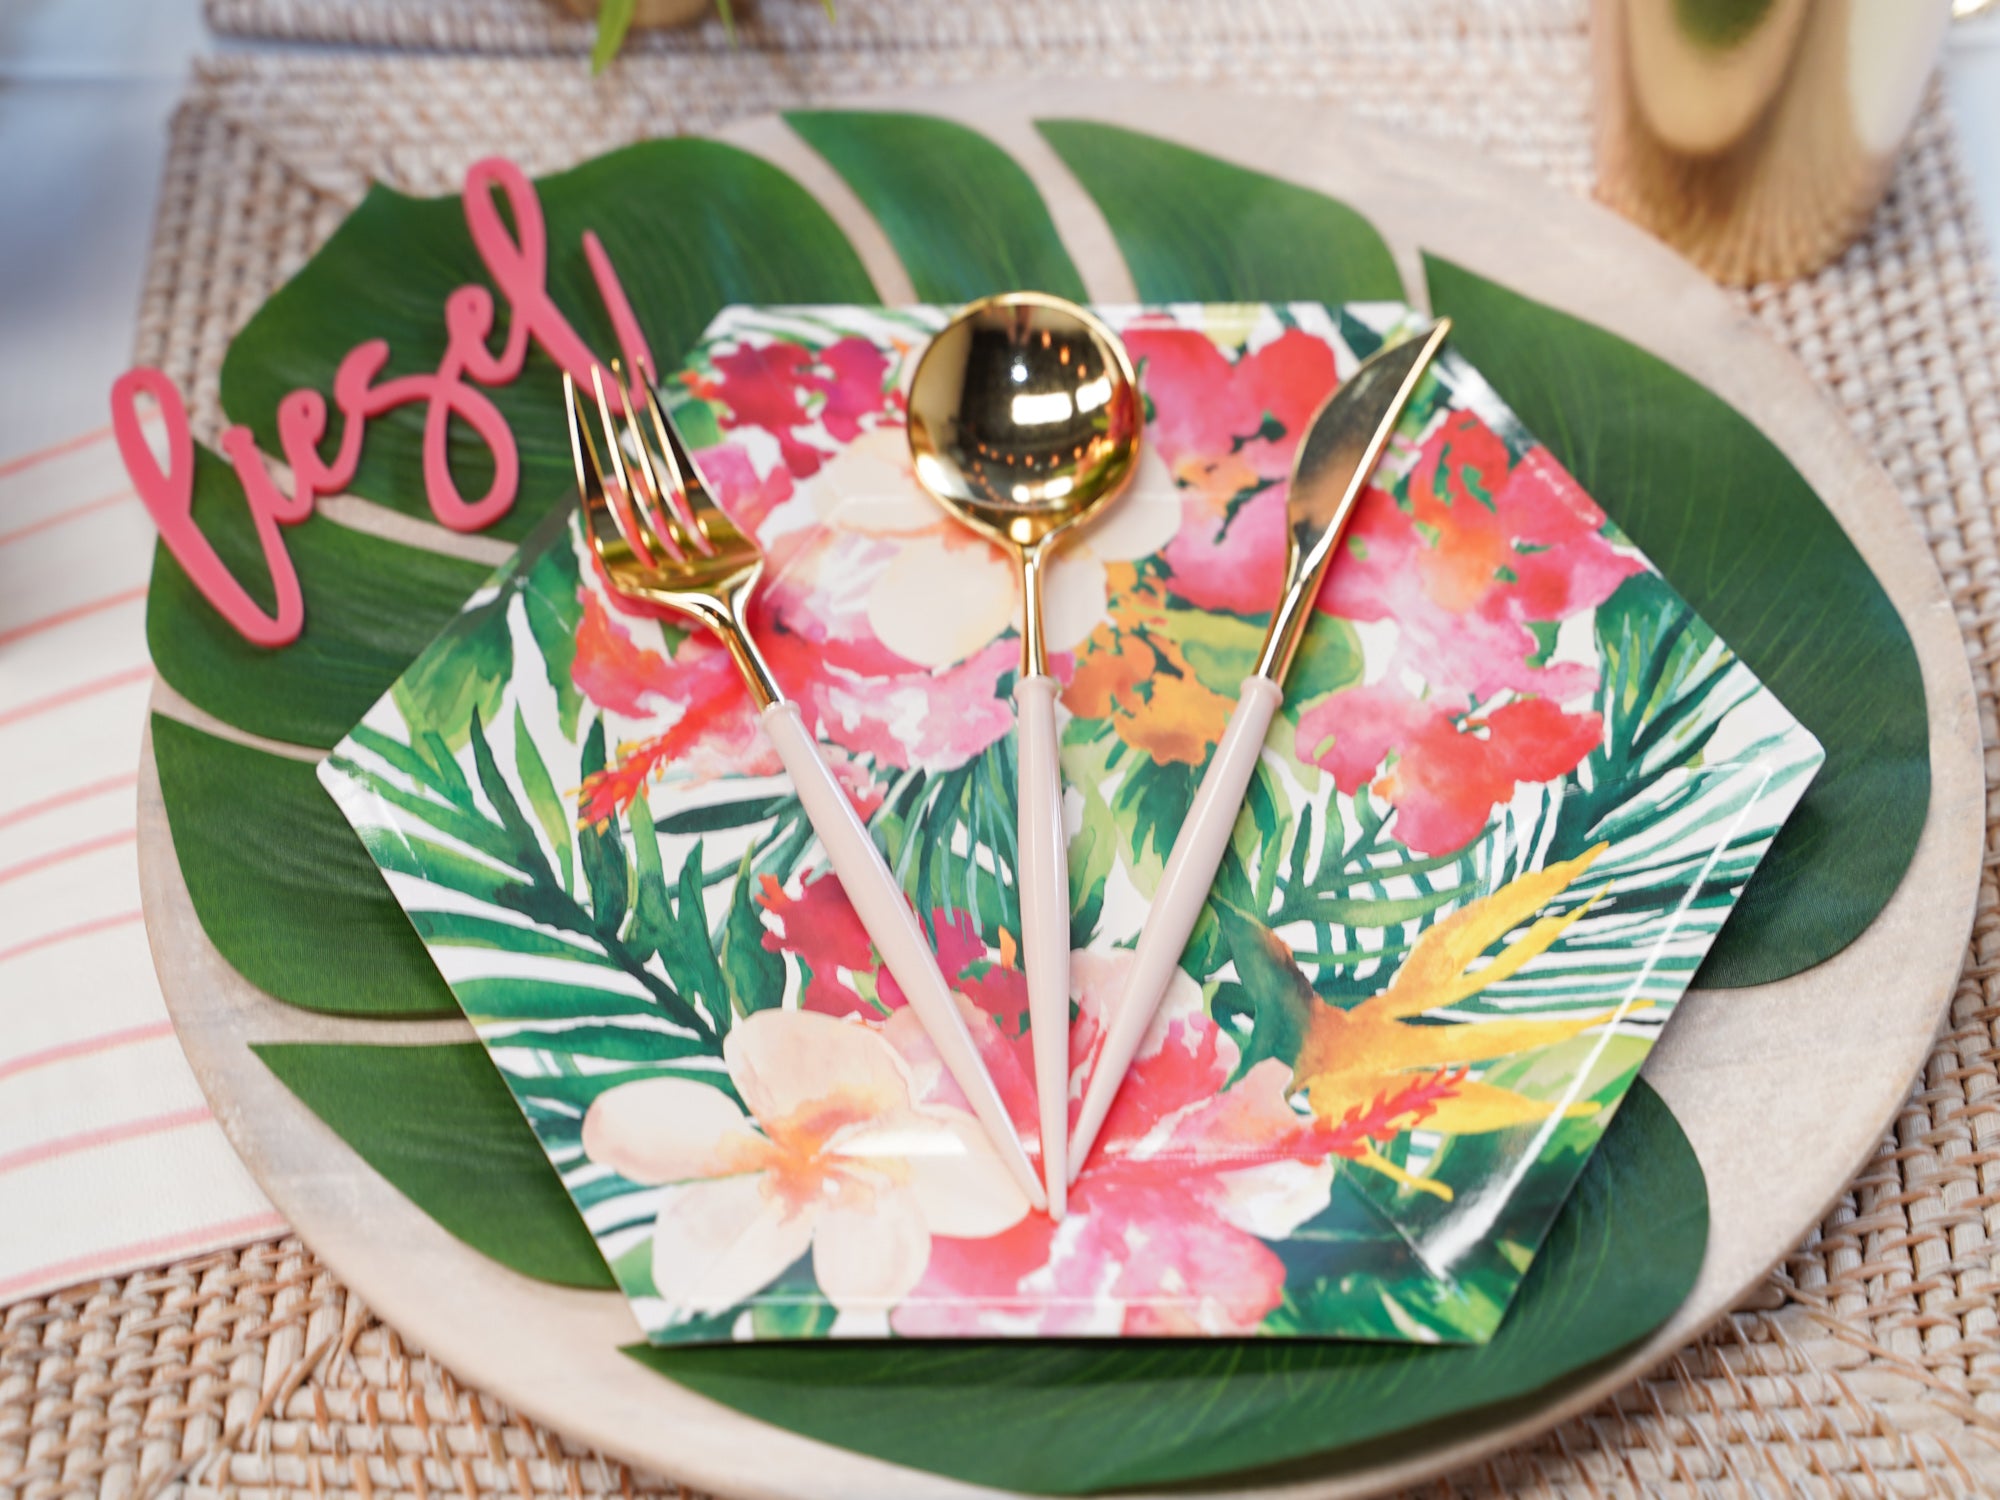 Tropical Party Decorations for Place Settings | The Party Darling